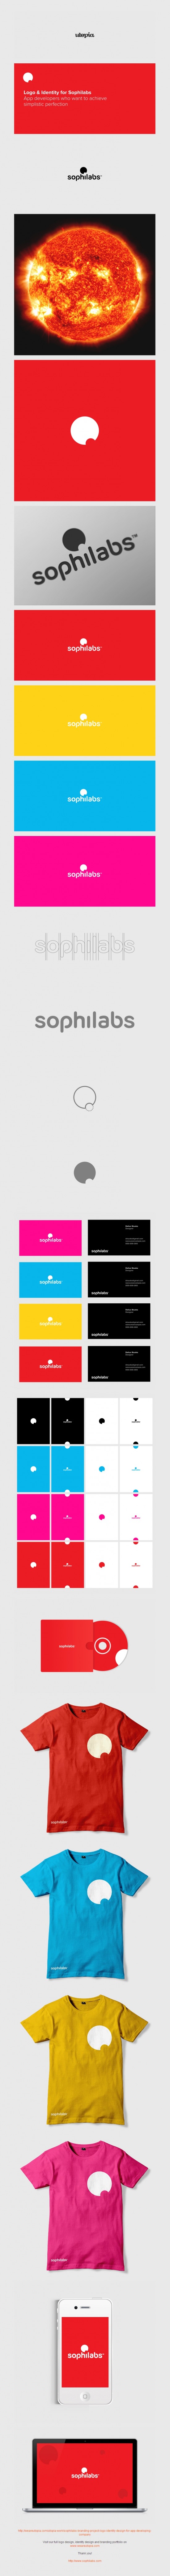 Sophilabs logo and corporate identity design by Utopia Branding Agency